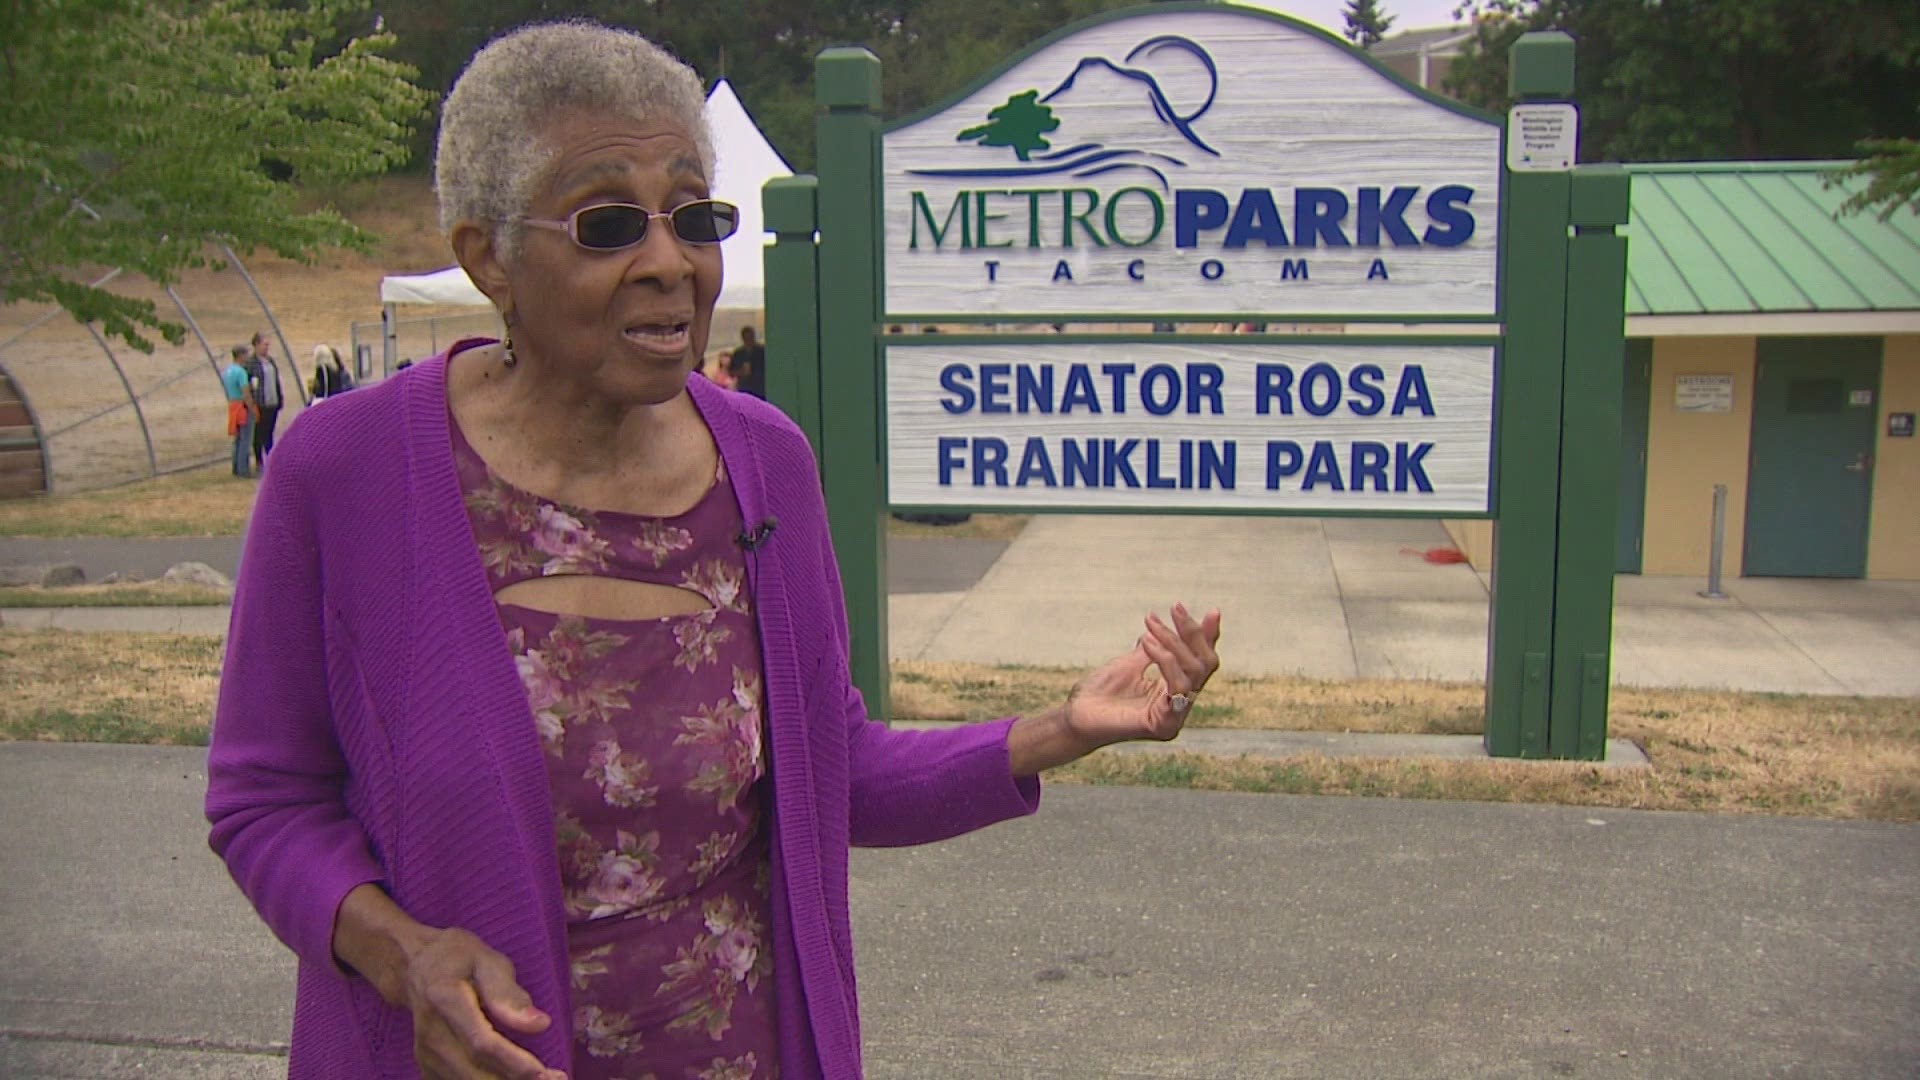 The park next to Franklin Elementary School was renamed Thursday after Rosa Franklin, the first Black woman to serve as a Washington state senator.